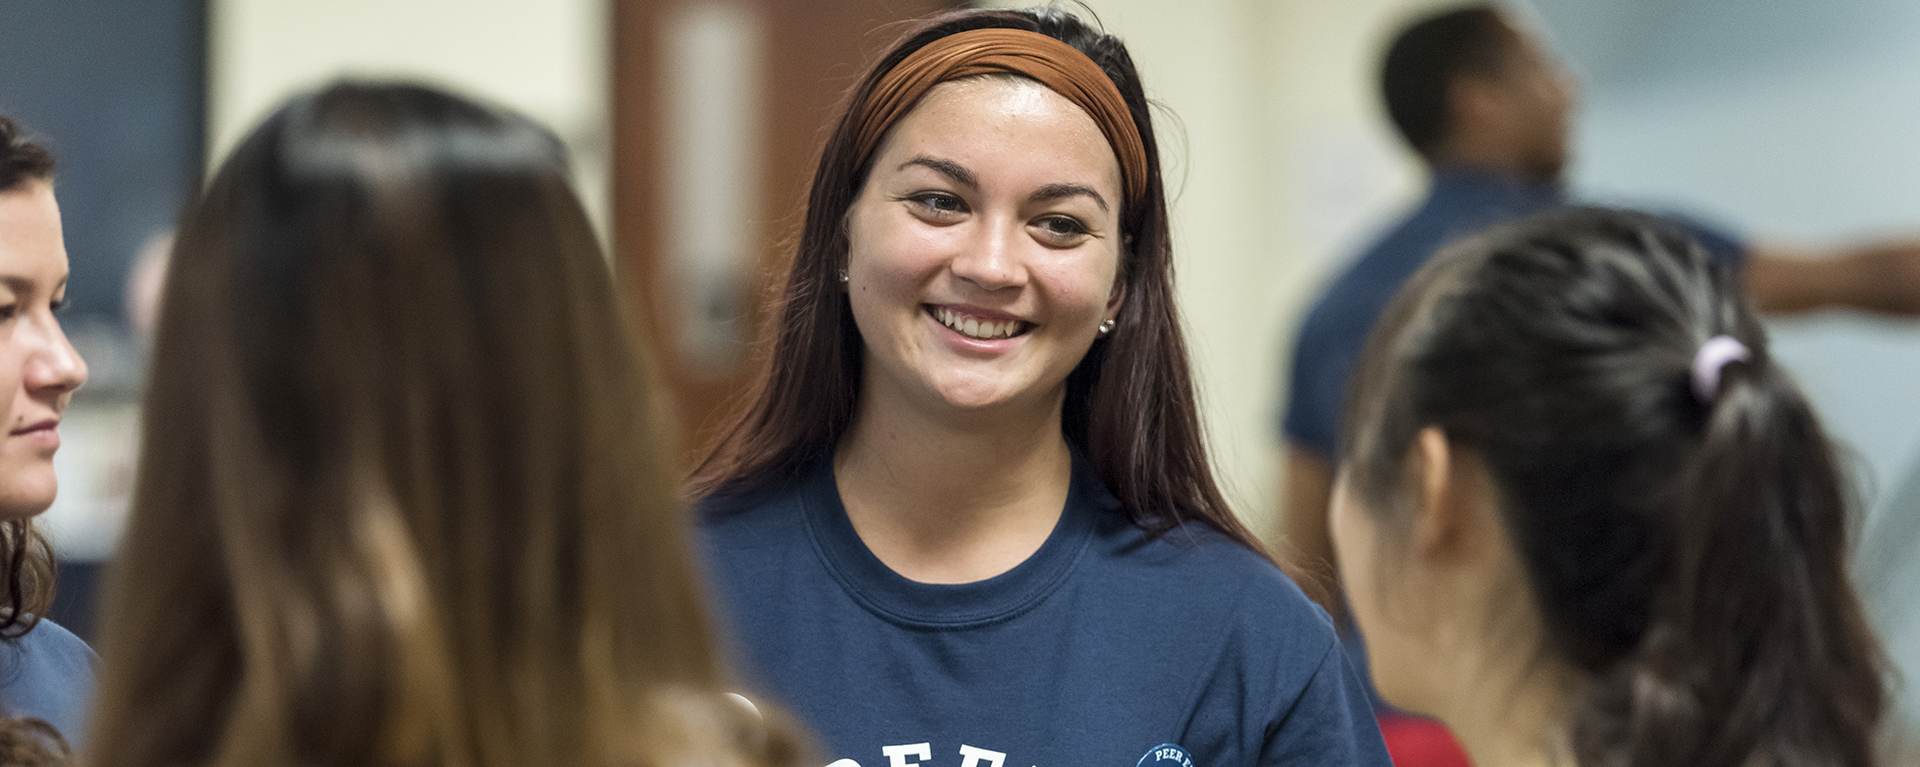 A peer educator speaks to fellow students during Welcome Week at Washburn